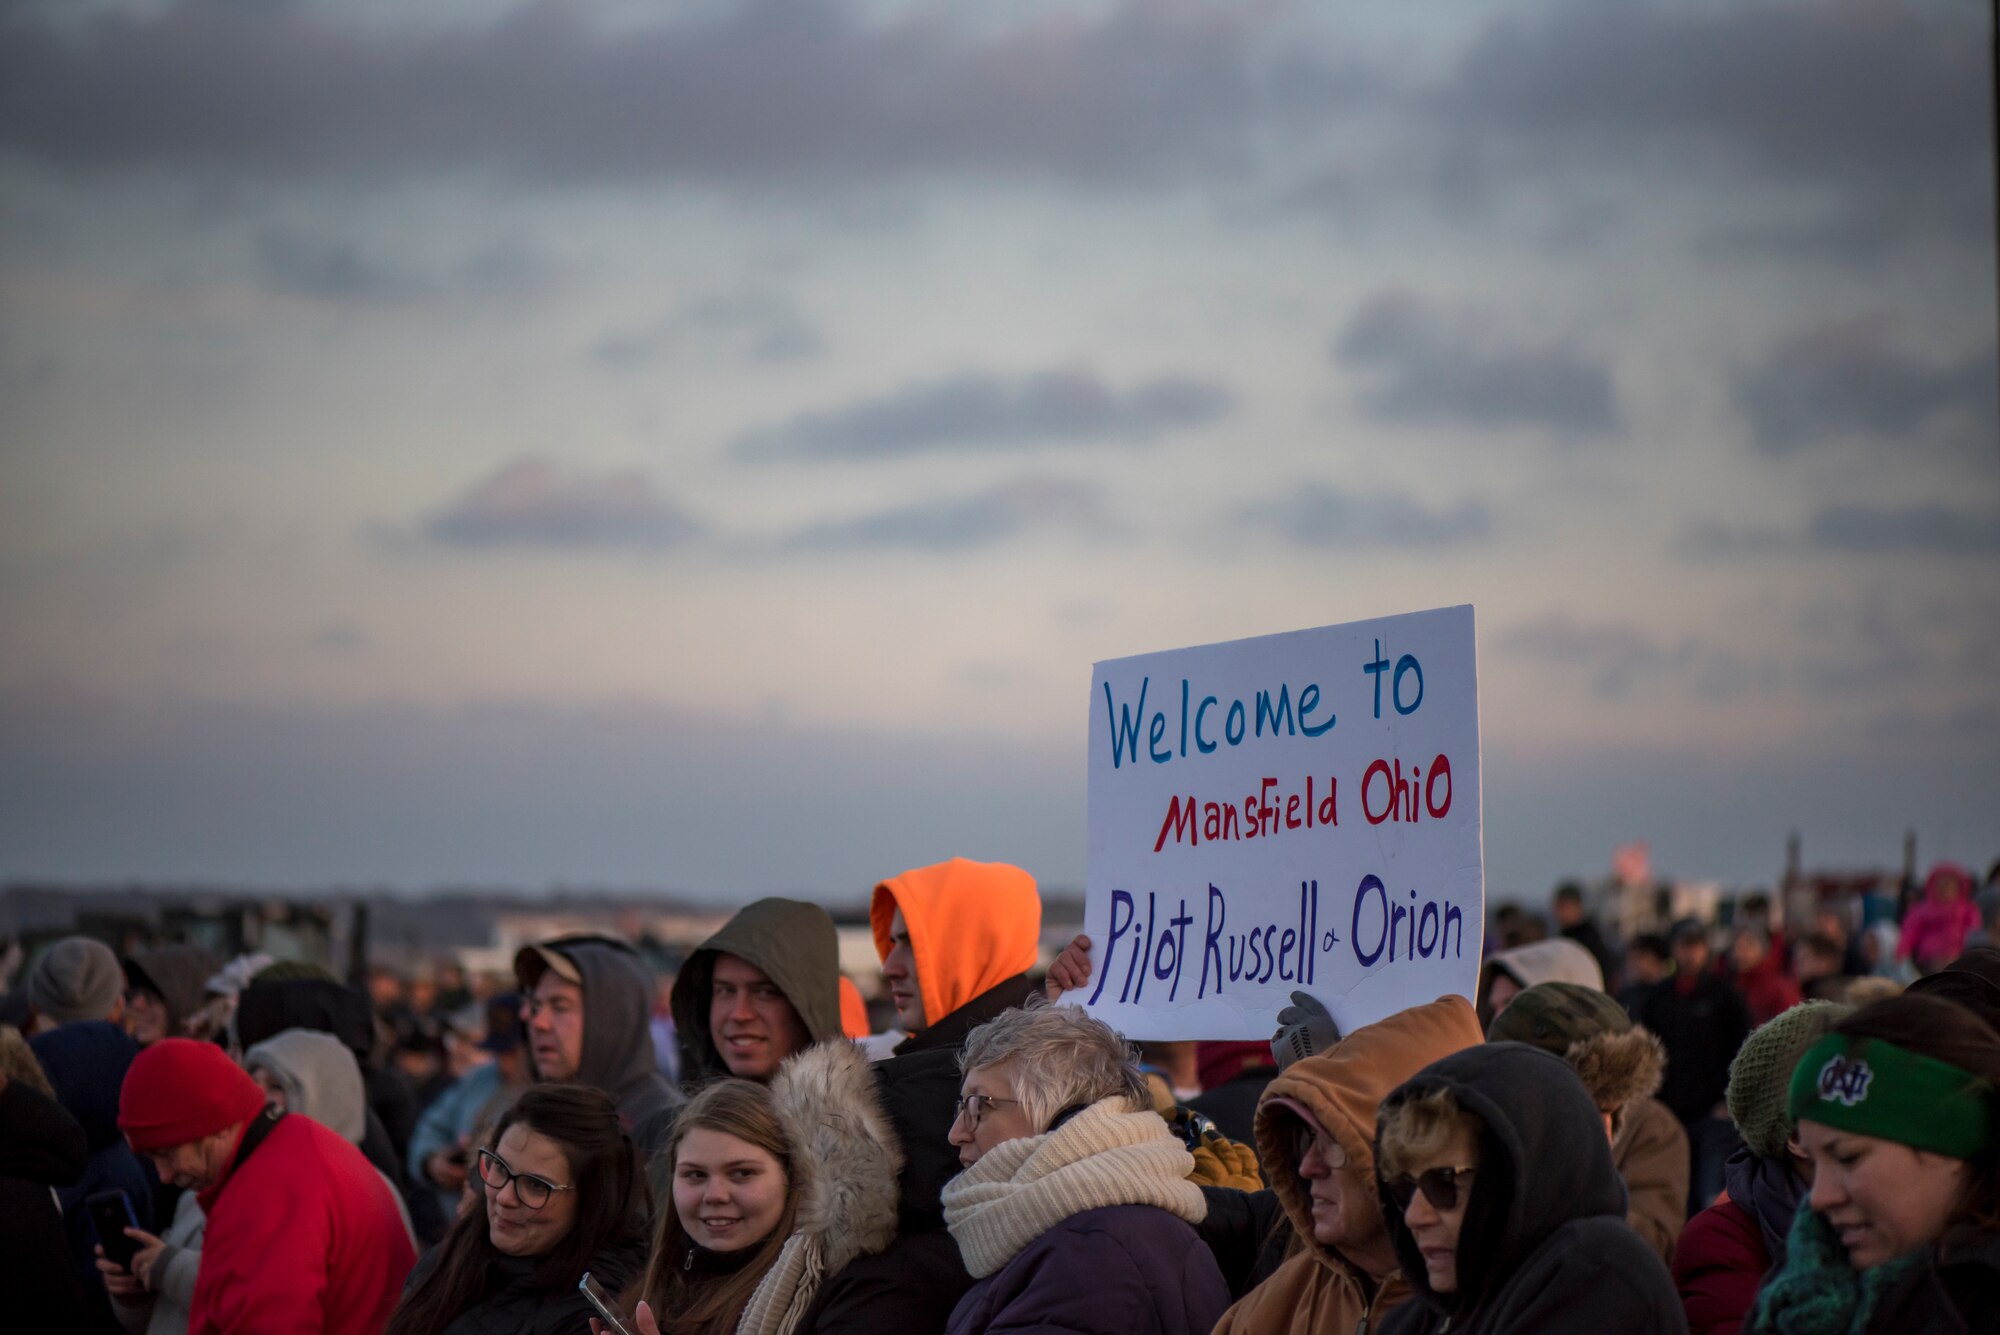 A photo of all the people who came to see the NASA Super Guppy at Mansfield Lahm Airport, holding up a sign that says Welcome to Mansfield Pilot Russell and Orion.